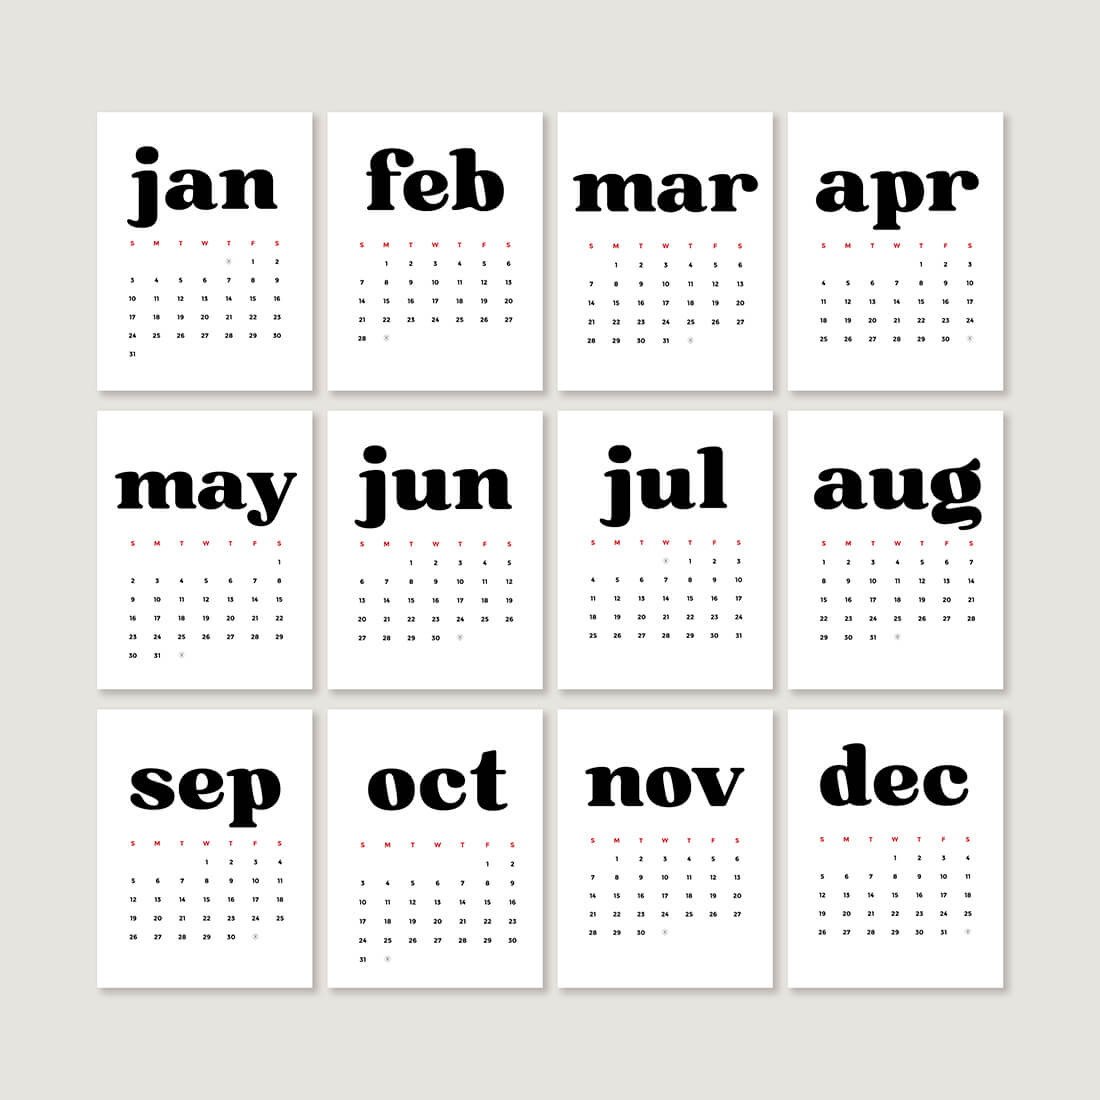 Little Gold Pixel • Free Printable 2021 Calendar • Download and print today! • Picture shows a preview of each of the twelve months of 2021